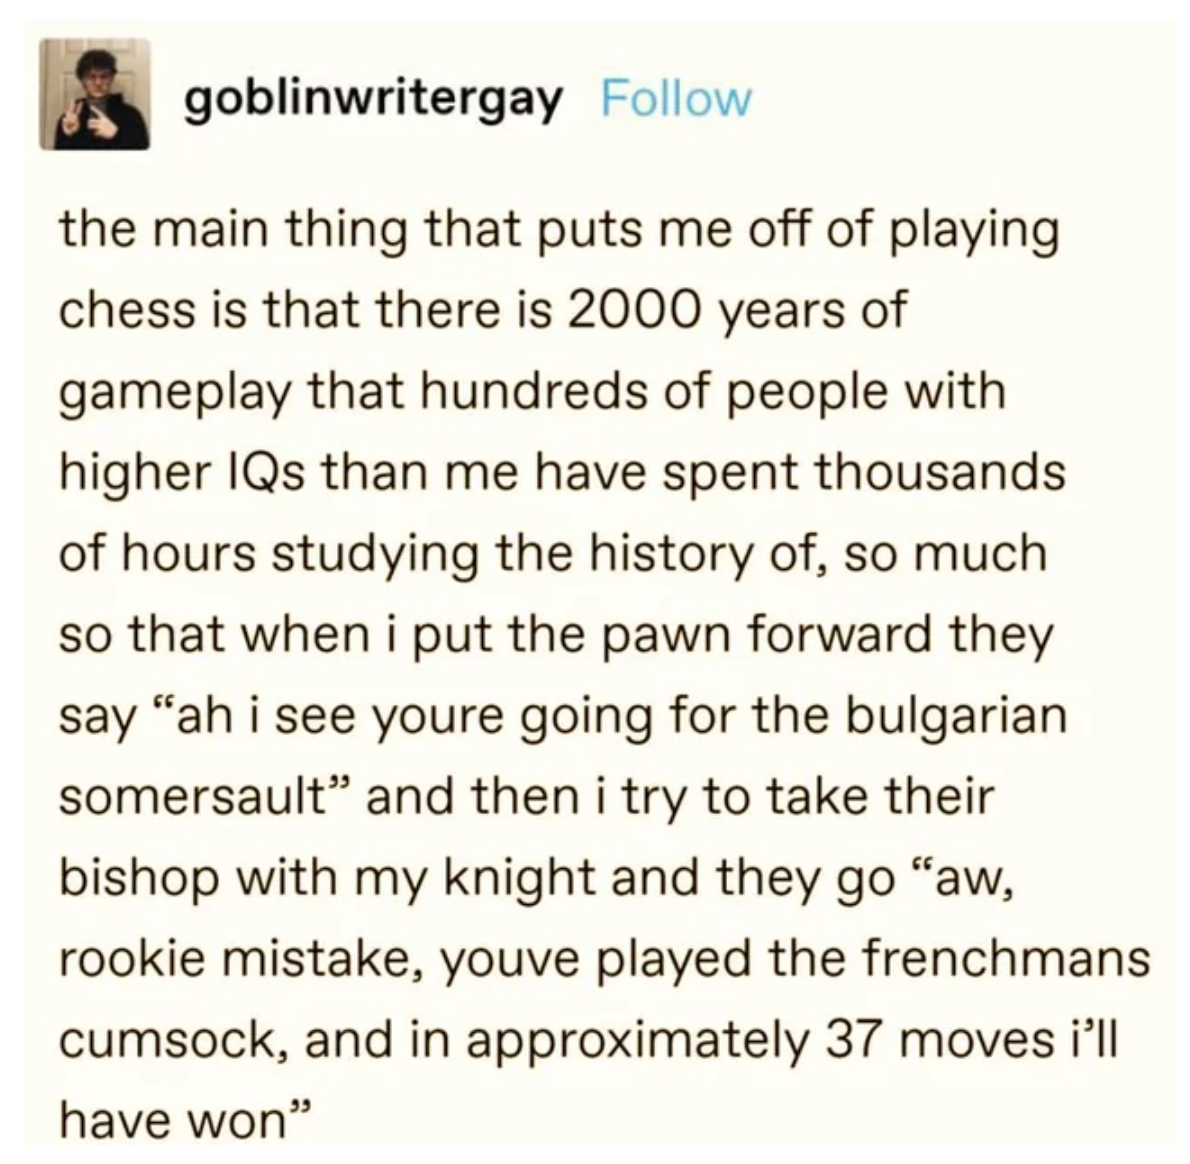 funny tweets and memes - chess frenchmans - goblinwritergay the main thing that puts me off of playing chess is that there is 2000 years of gameplay that hundreds of people with higher IQs than me have spent thousands of hours studying the history of, so 